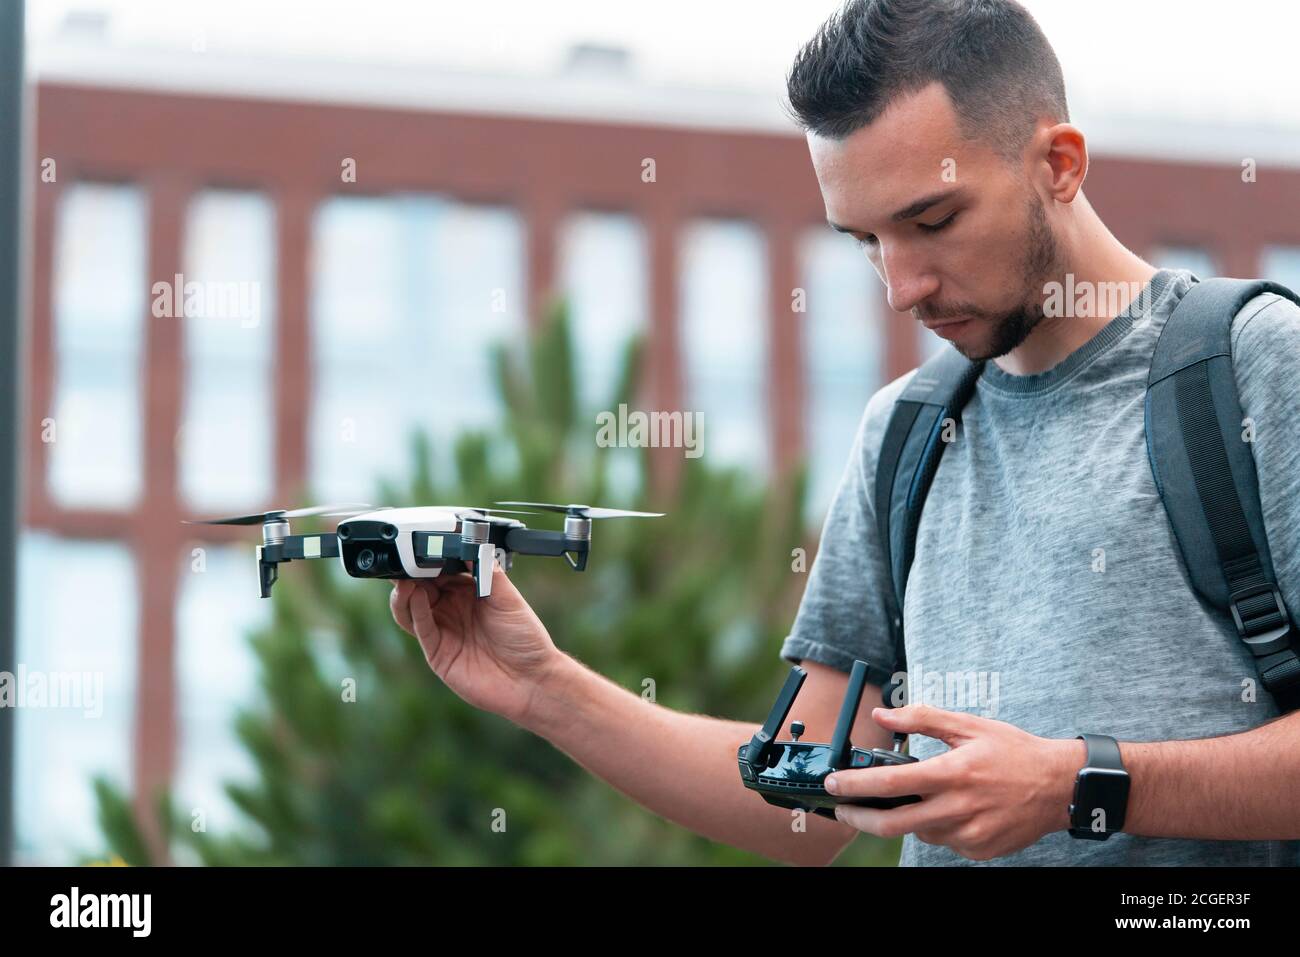 Young Handsome Brunette Man Launching Drone Quadcopter and Looking At Remote Controller Joystick. Urban Stlilysh Contemporary Cityscape. Modern device Stock Photo